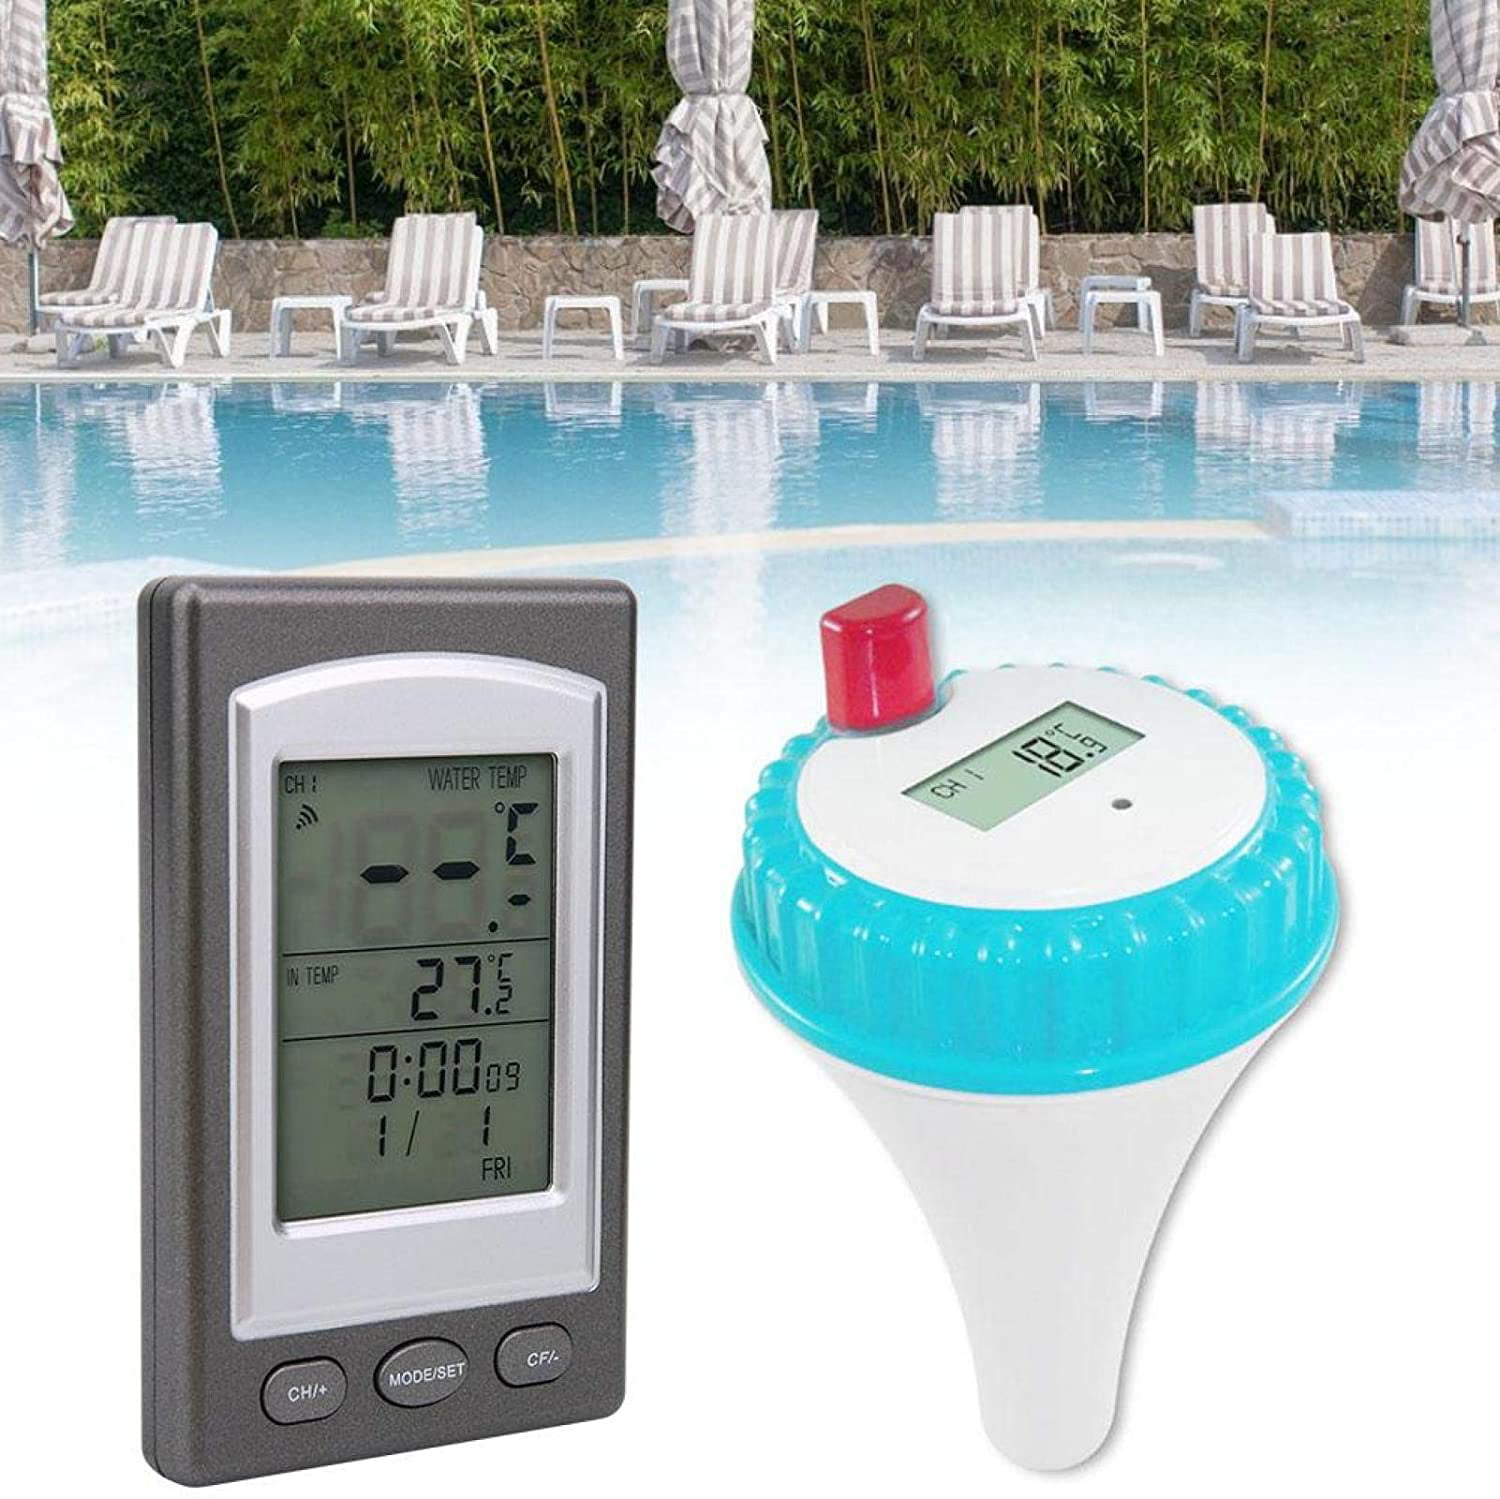 Wireless Remote Floating Thermometer Swimming Pool Waterproof Hot Tub Pond Spa